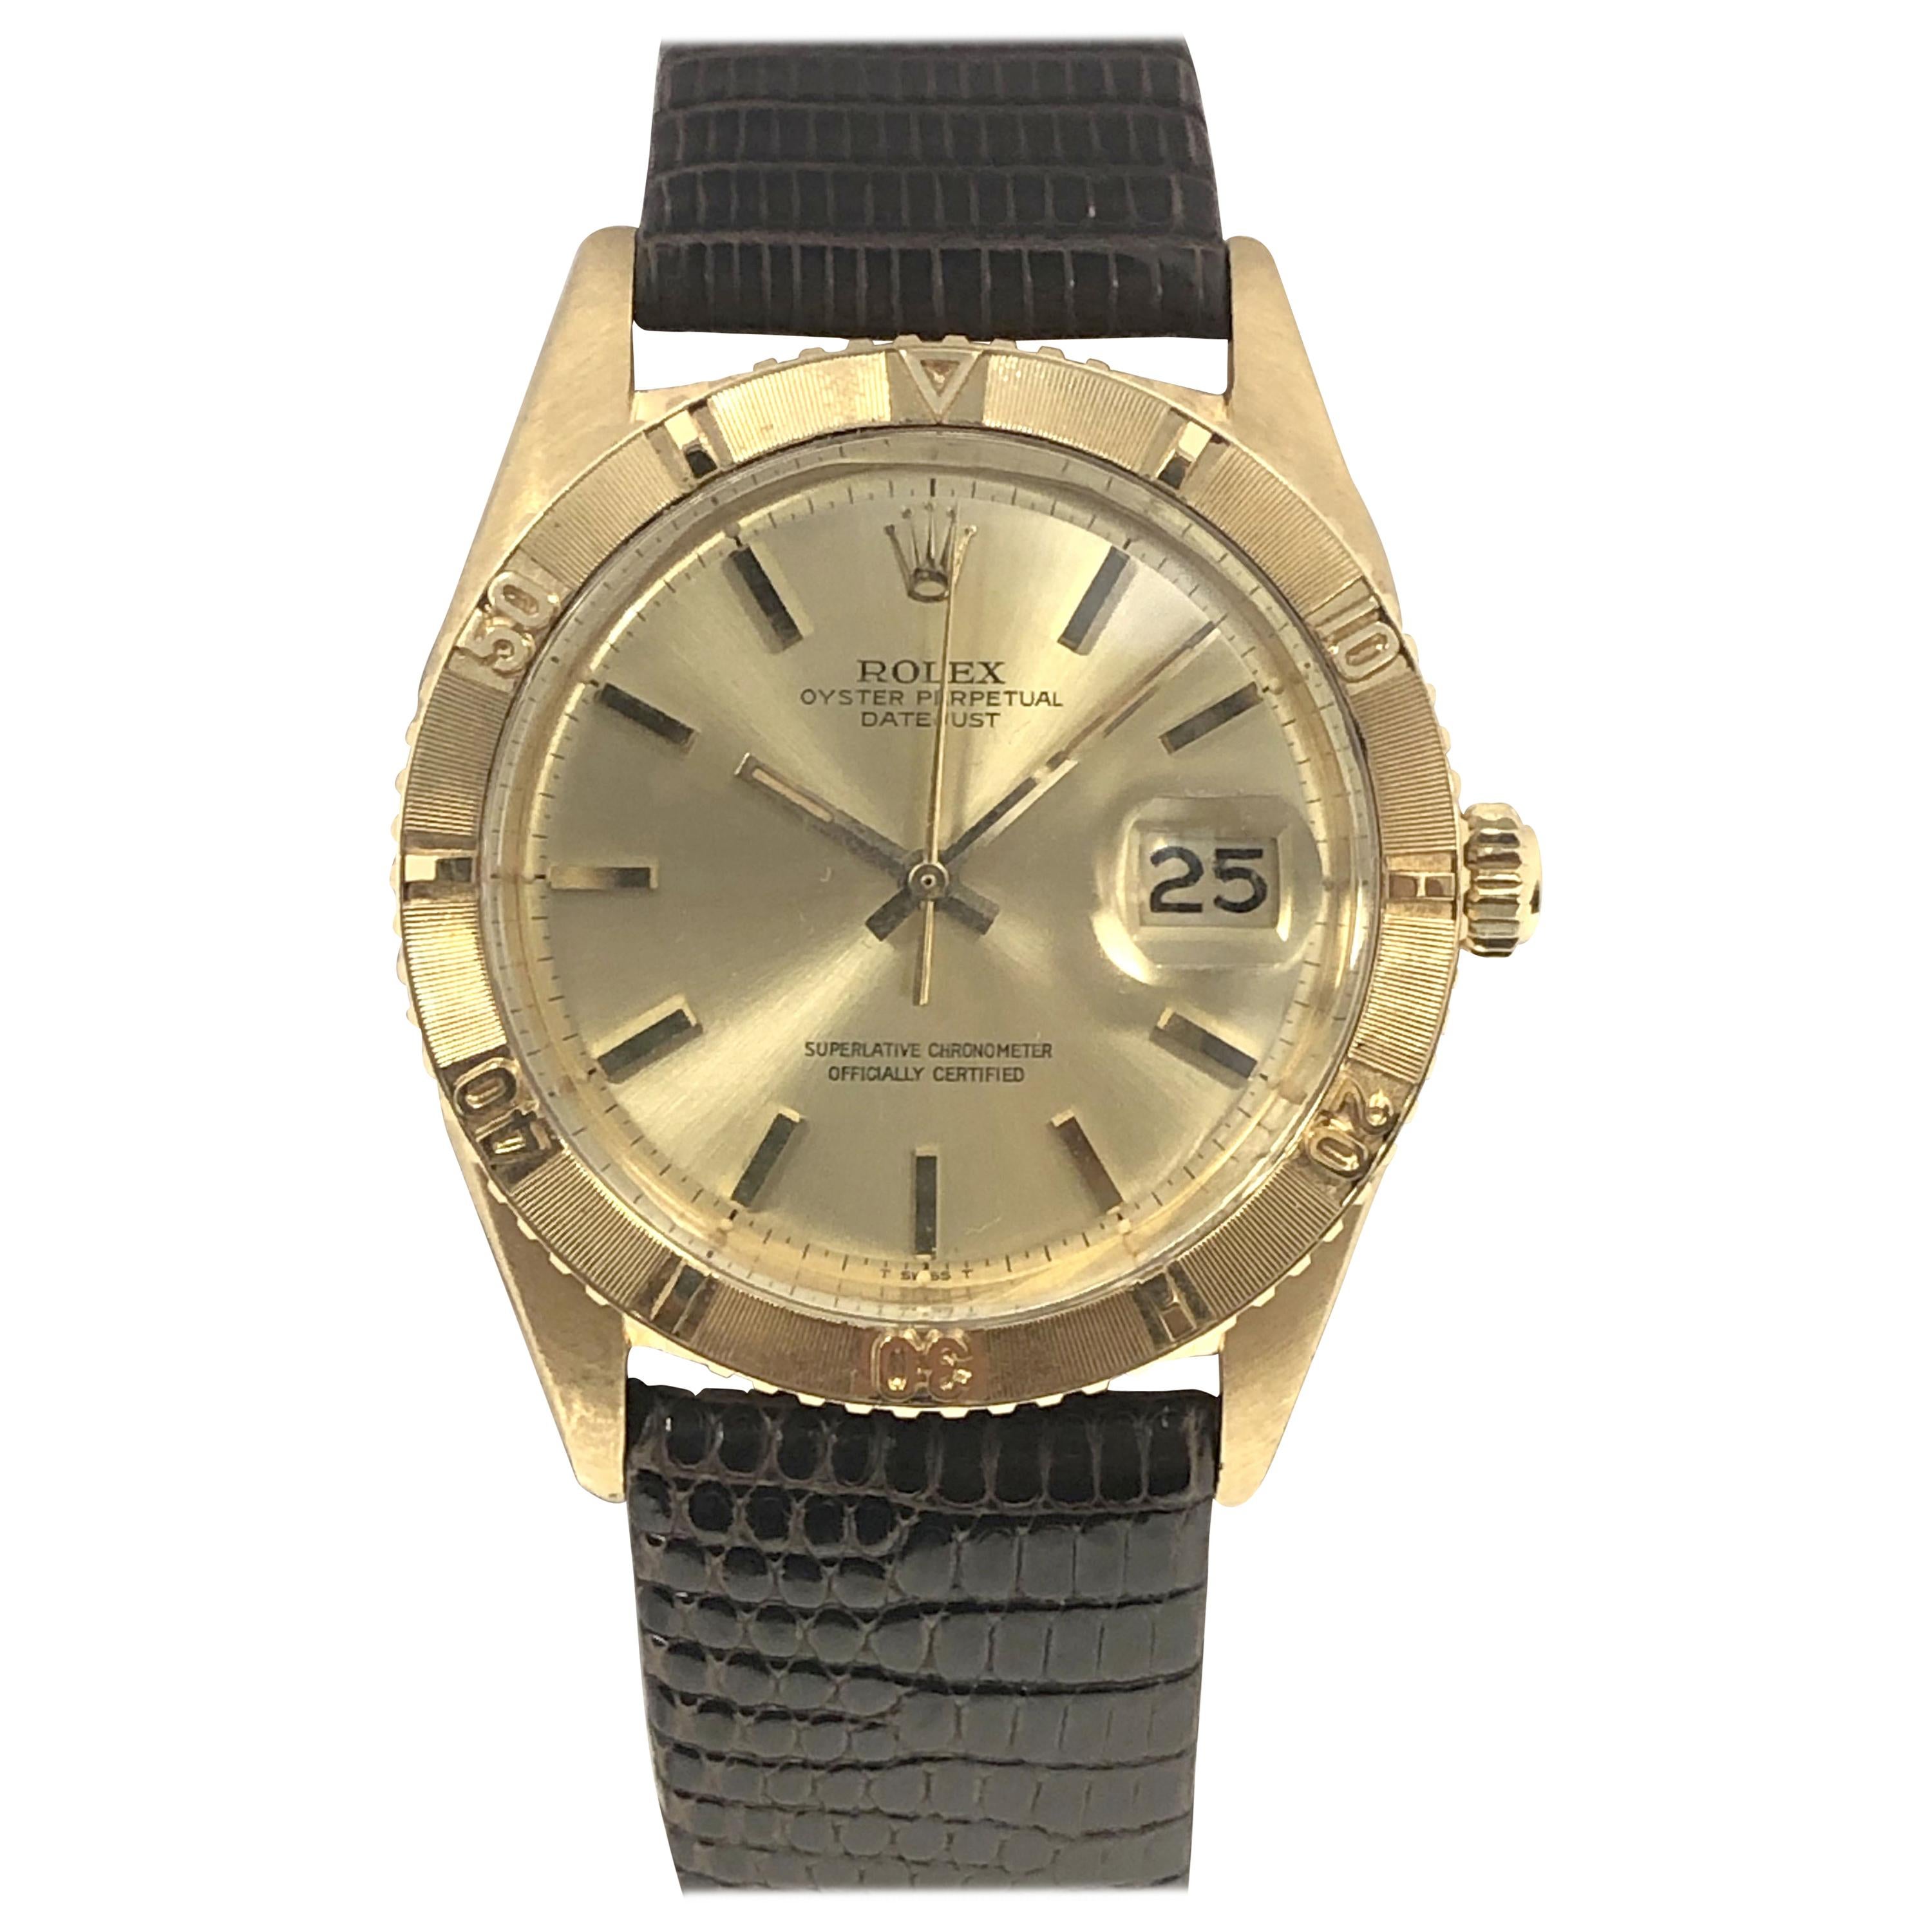 Rolex Vintage Datejust Thunderbird Turn-O-Graph Two-Tone Watch 1625 at ...